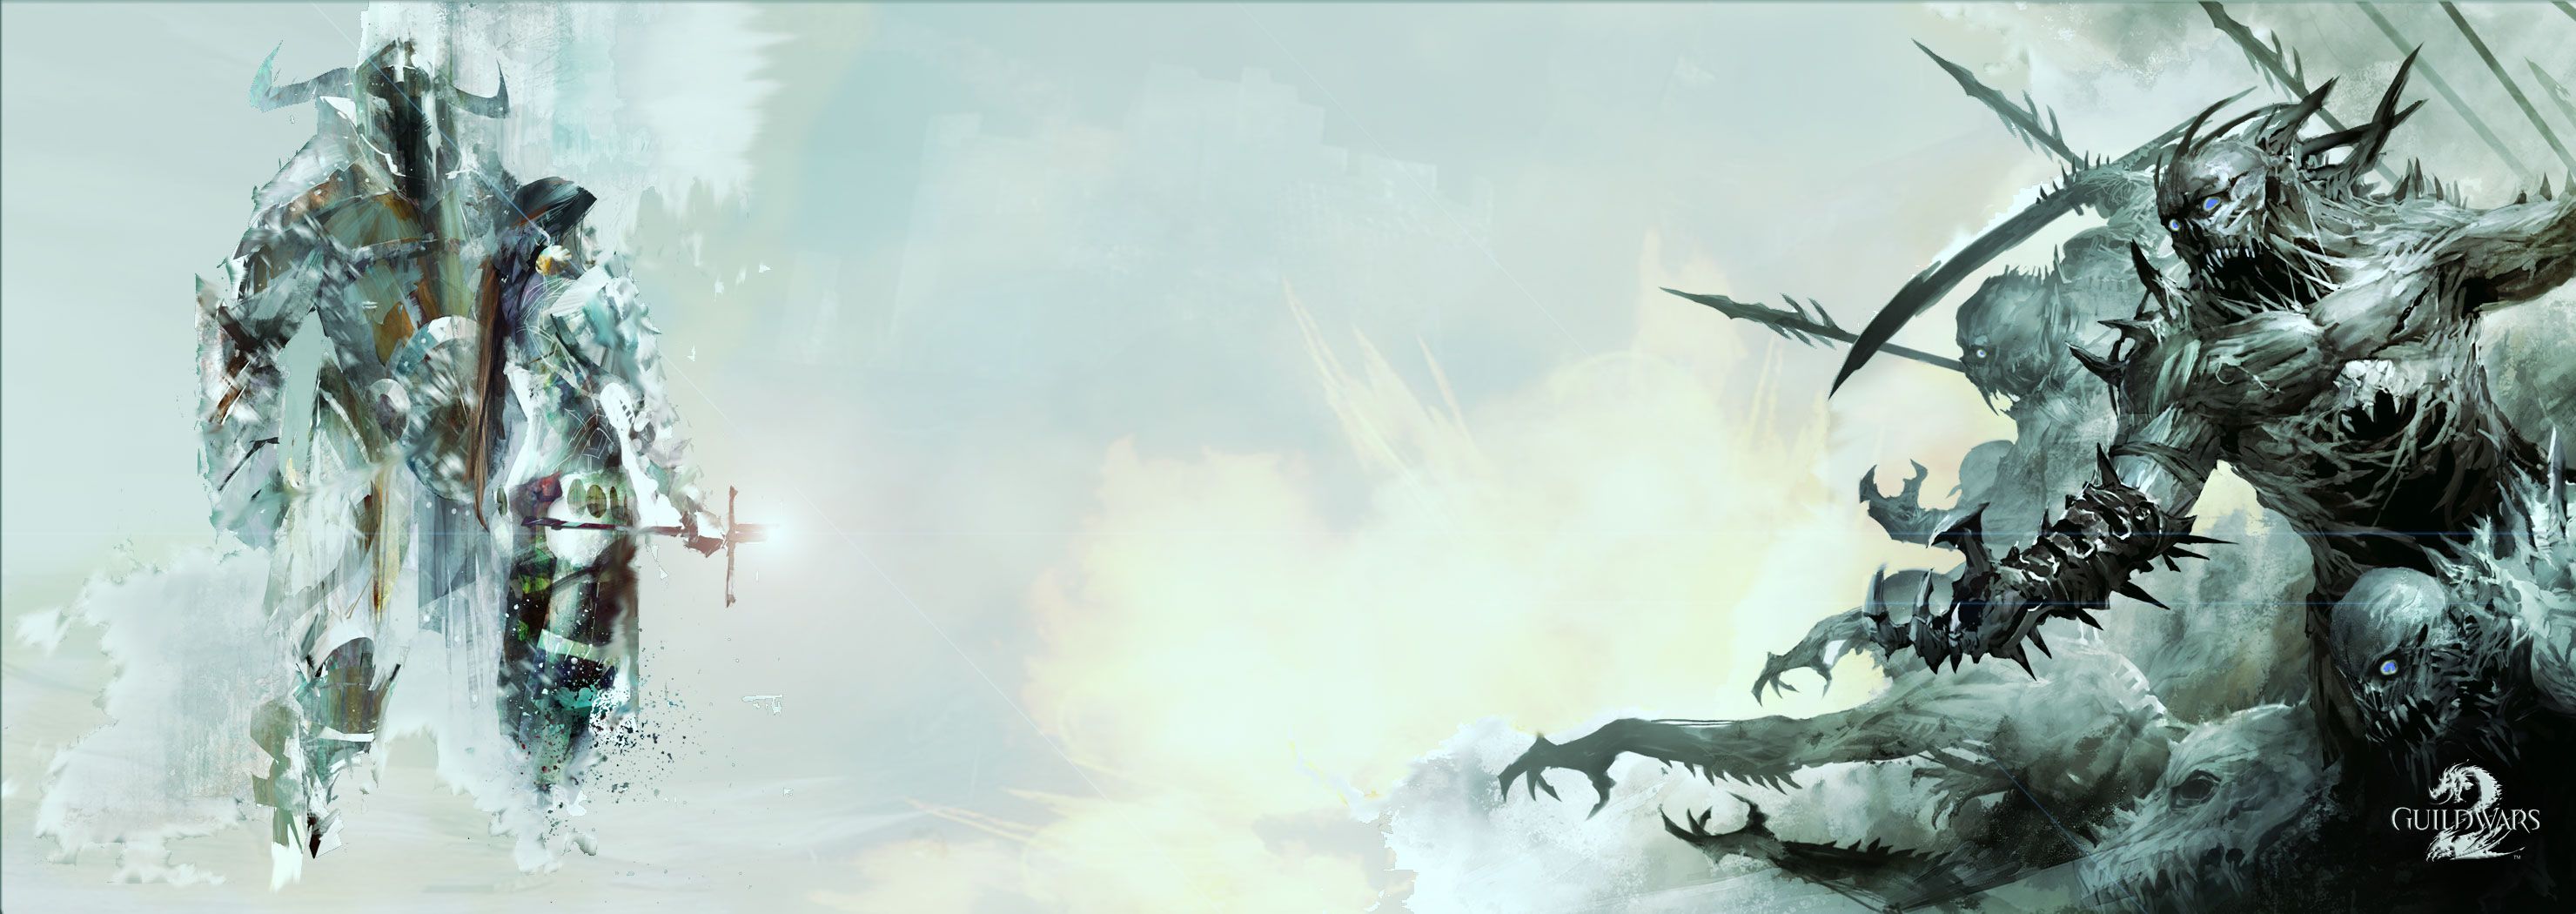 A Guild Wars Wallpaper For The Resolution X Dual